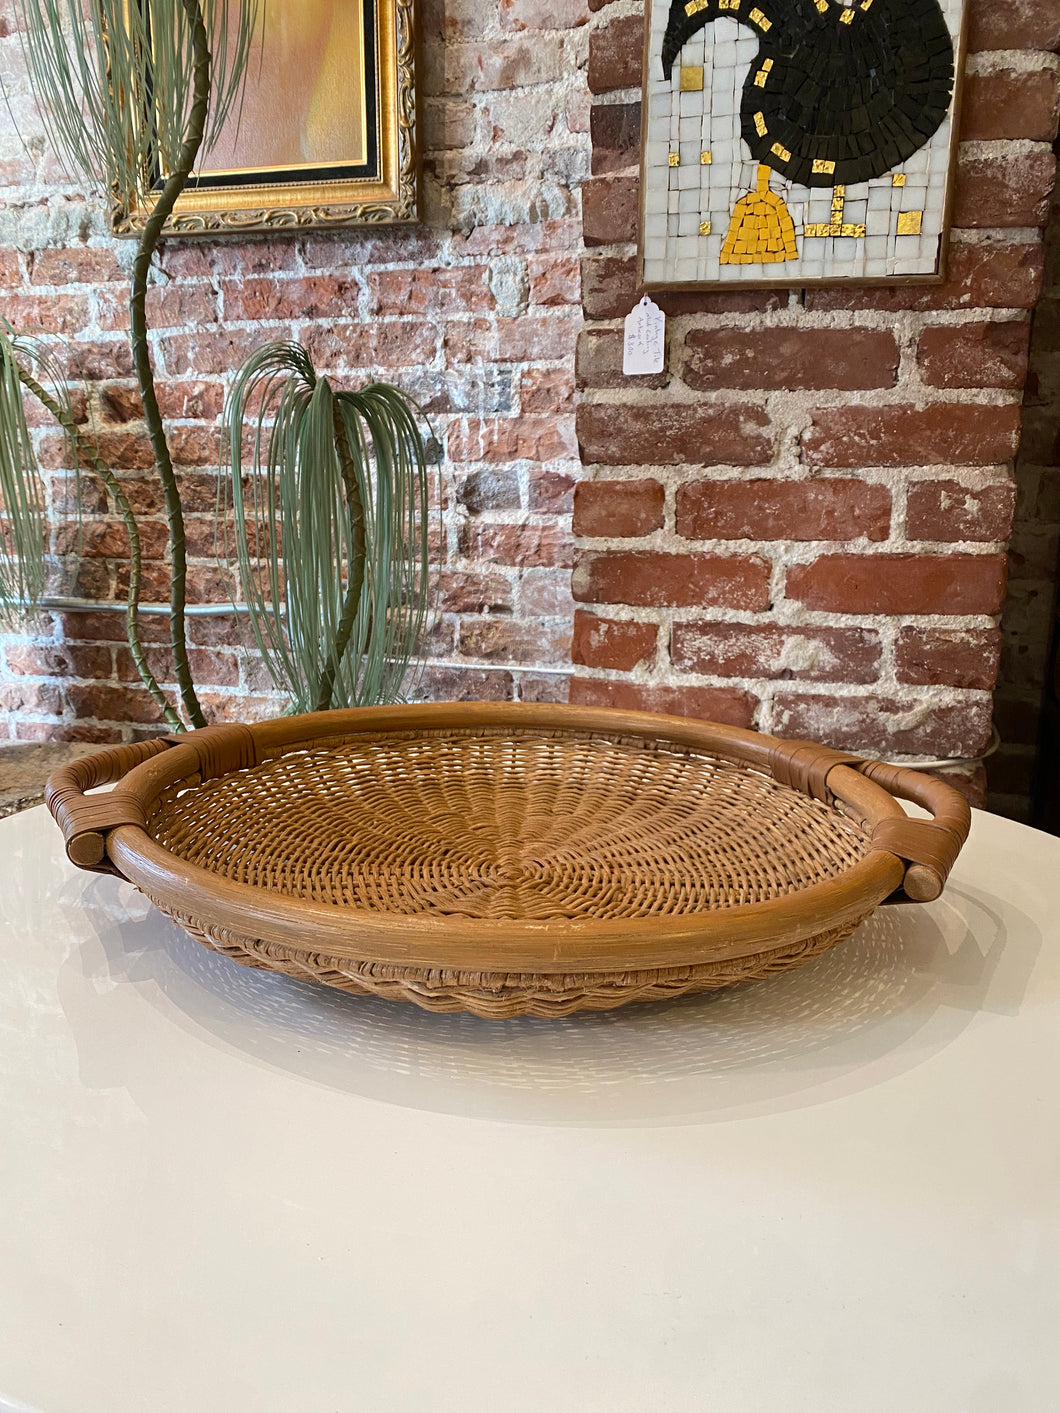 Vintage Large Wicker Tray with Handles